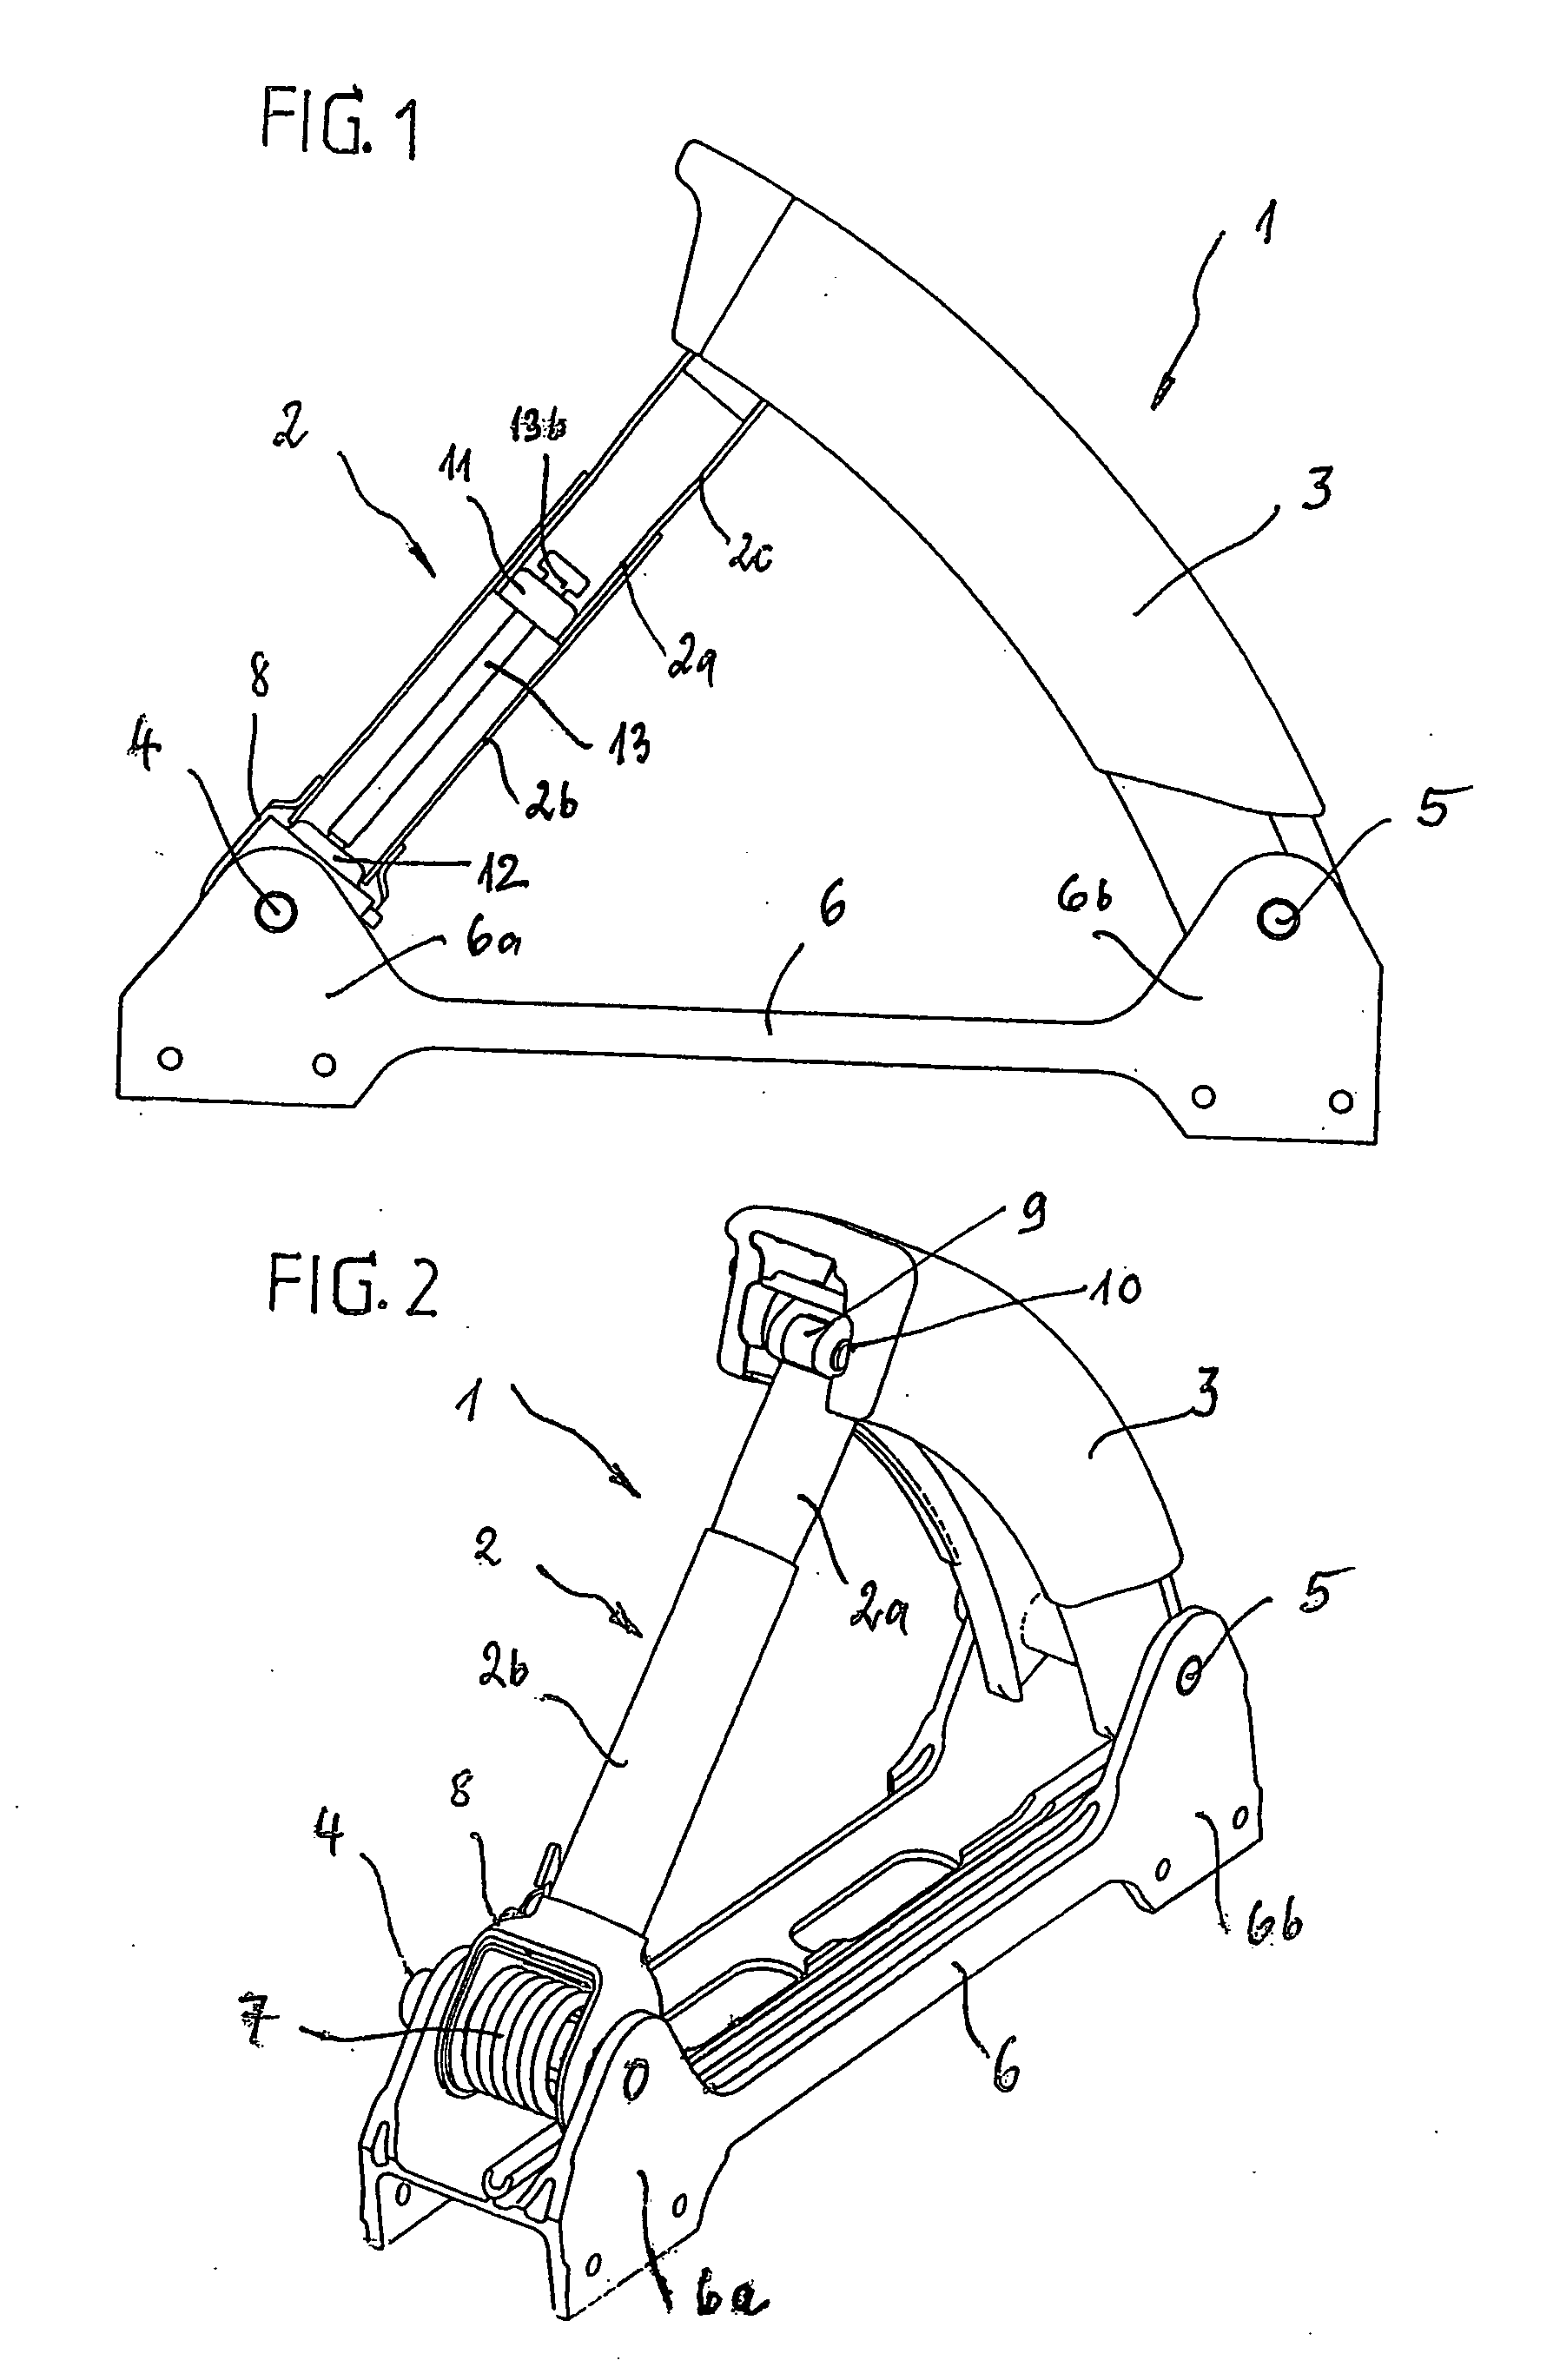 Rollover protection system for motor vehicles with an actively deployable rollover body